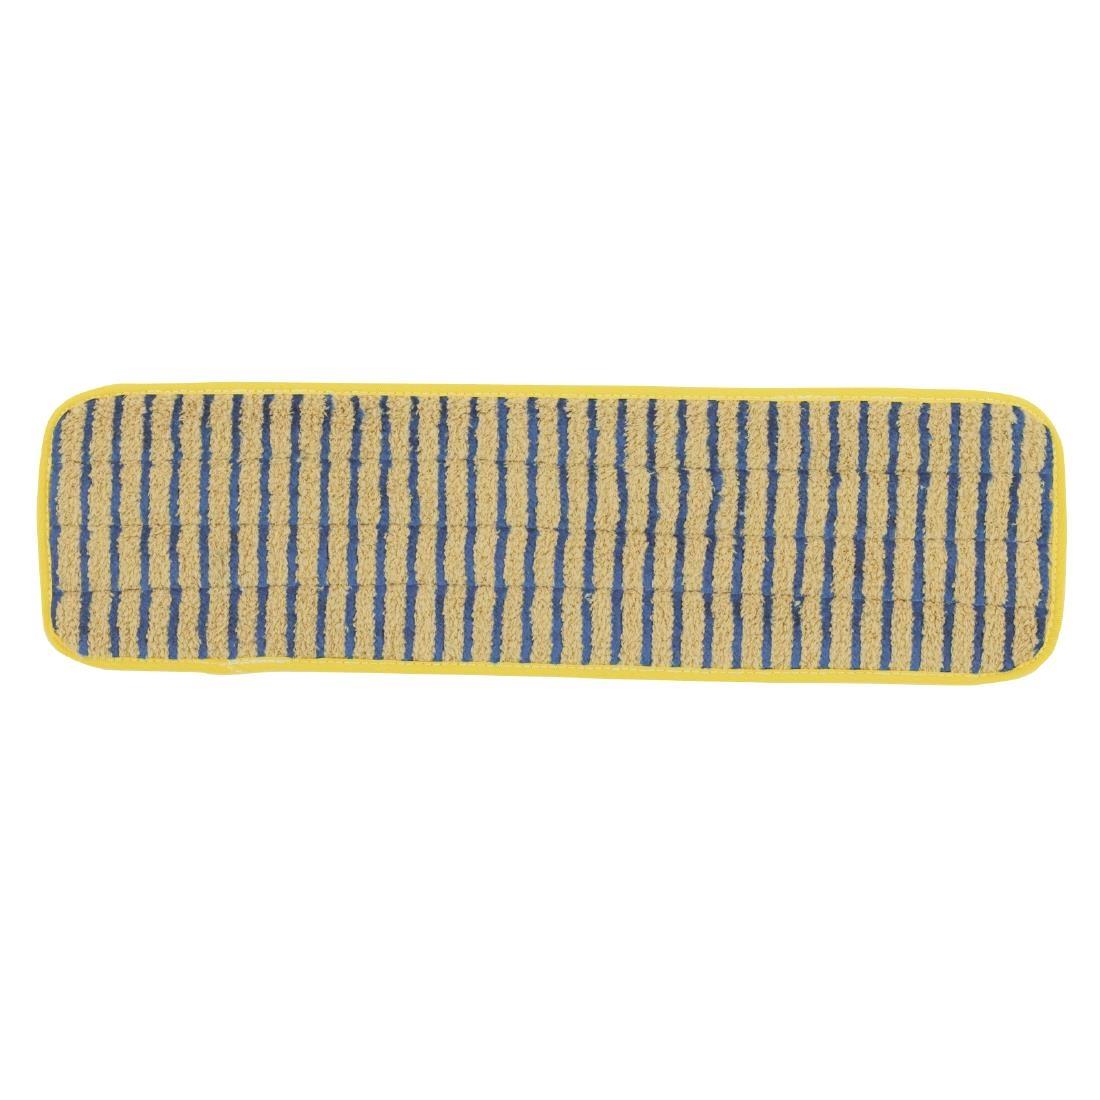 Rubbermaid Pulse Microfibre Spray Mop Scrubber Pad (Pack of 10) - GL547  - 1